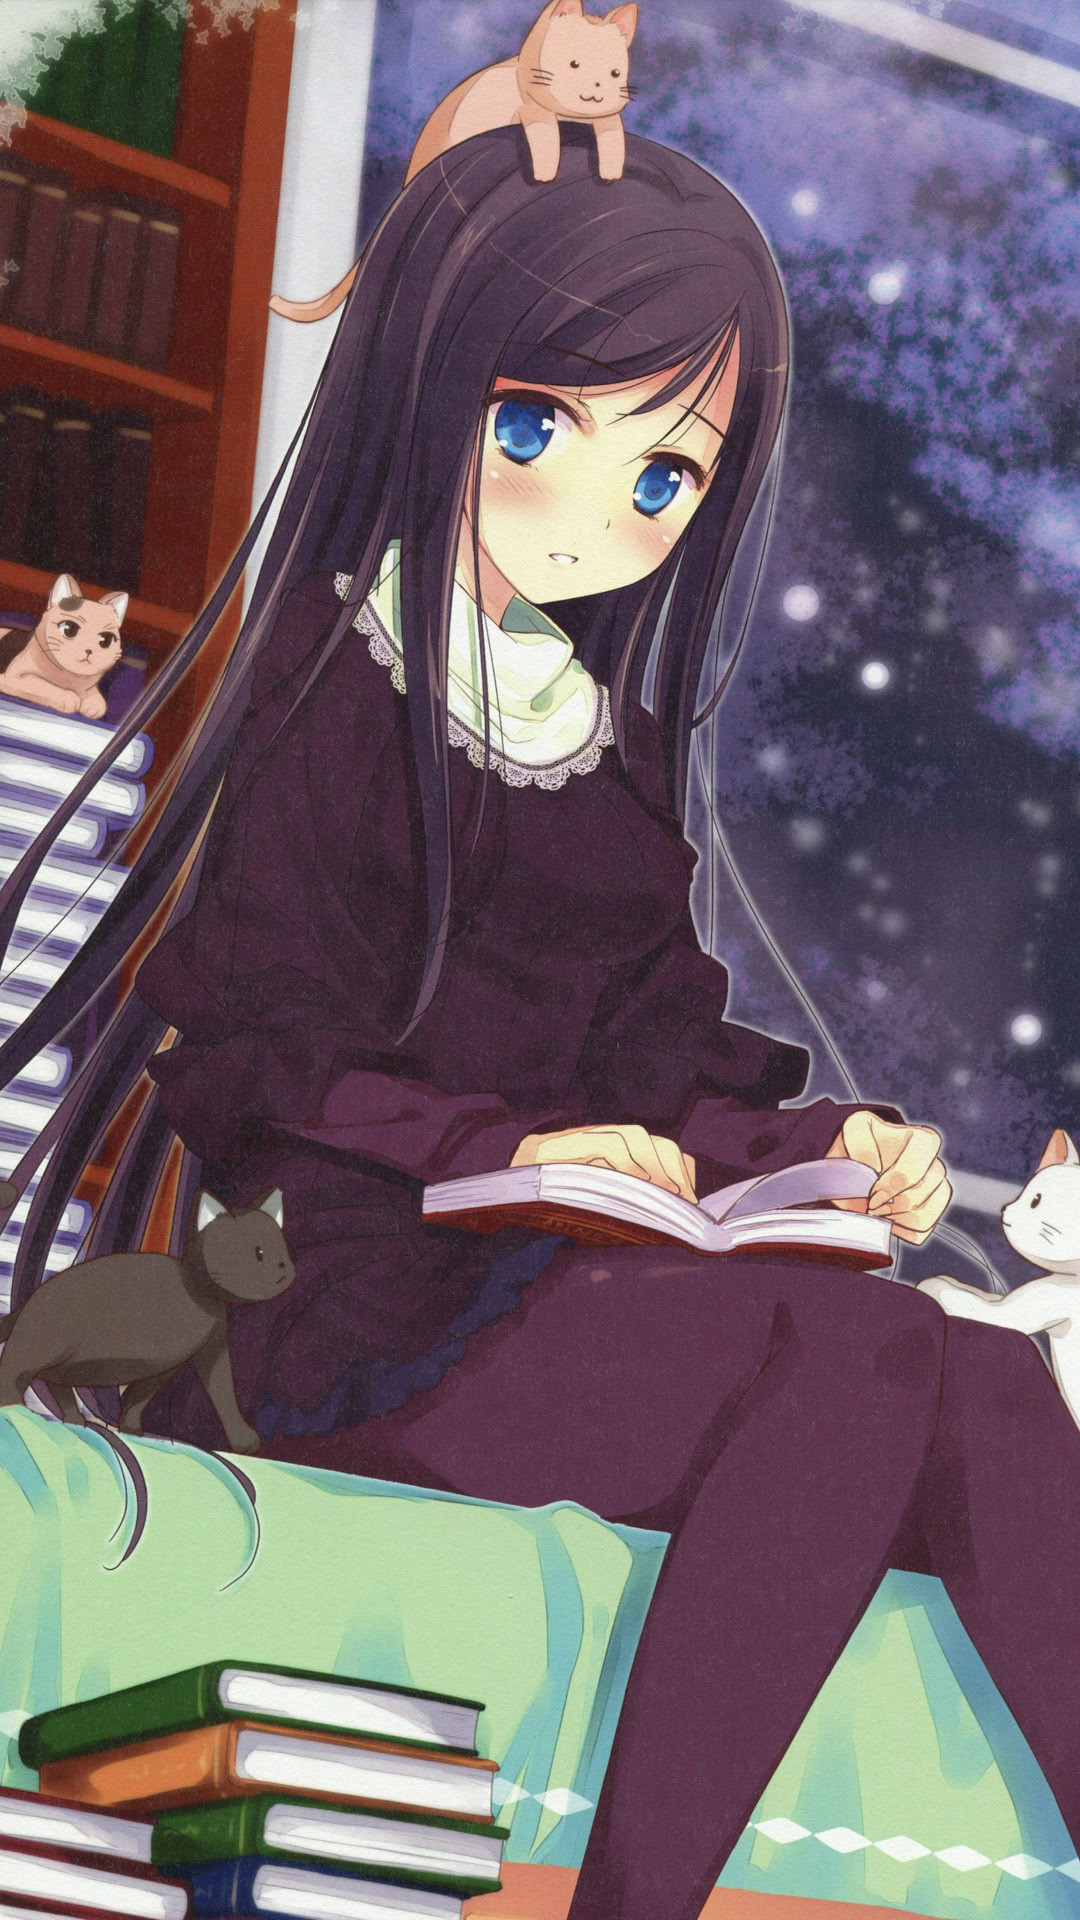 1080x1920 Reading with her cats Wallpaper